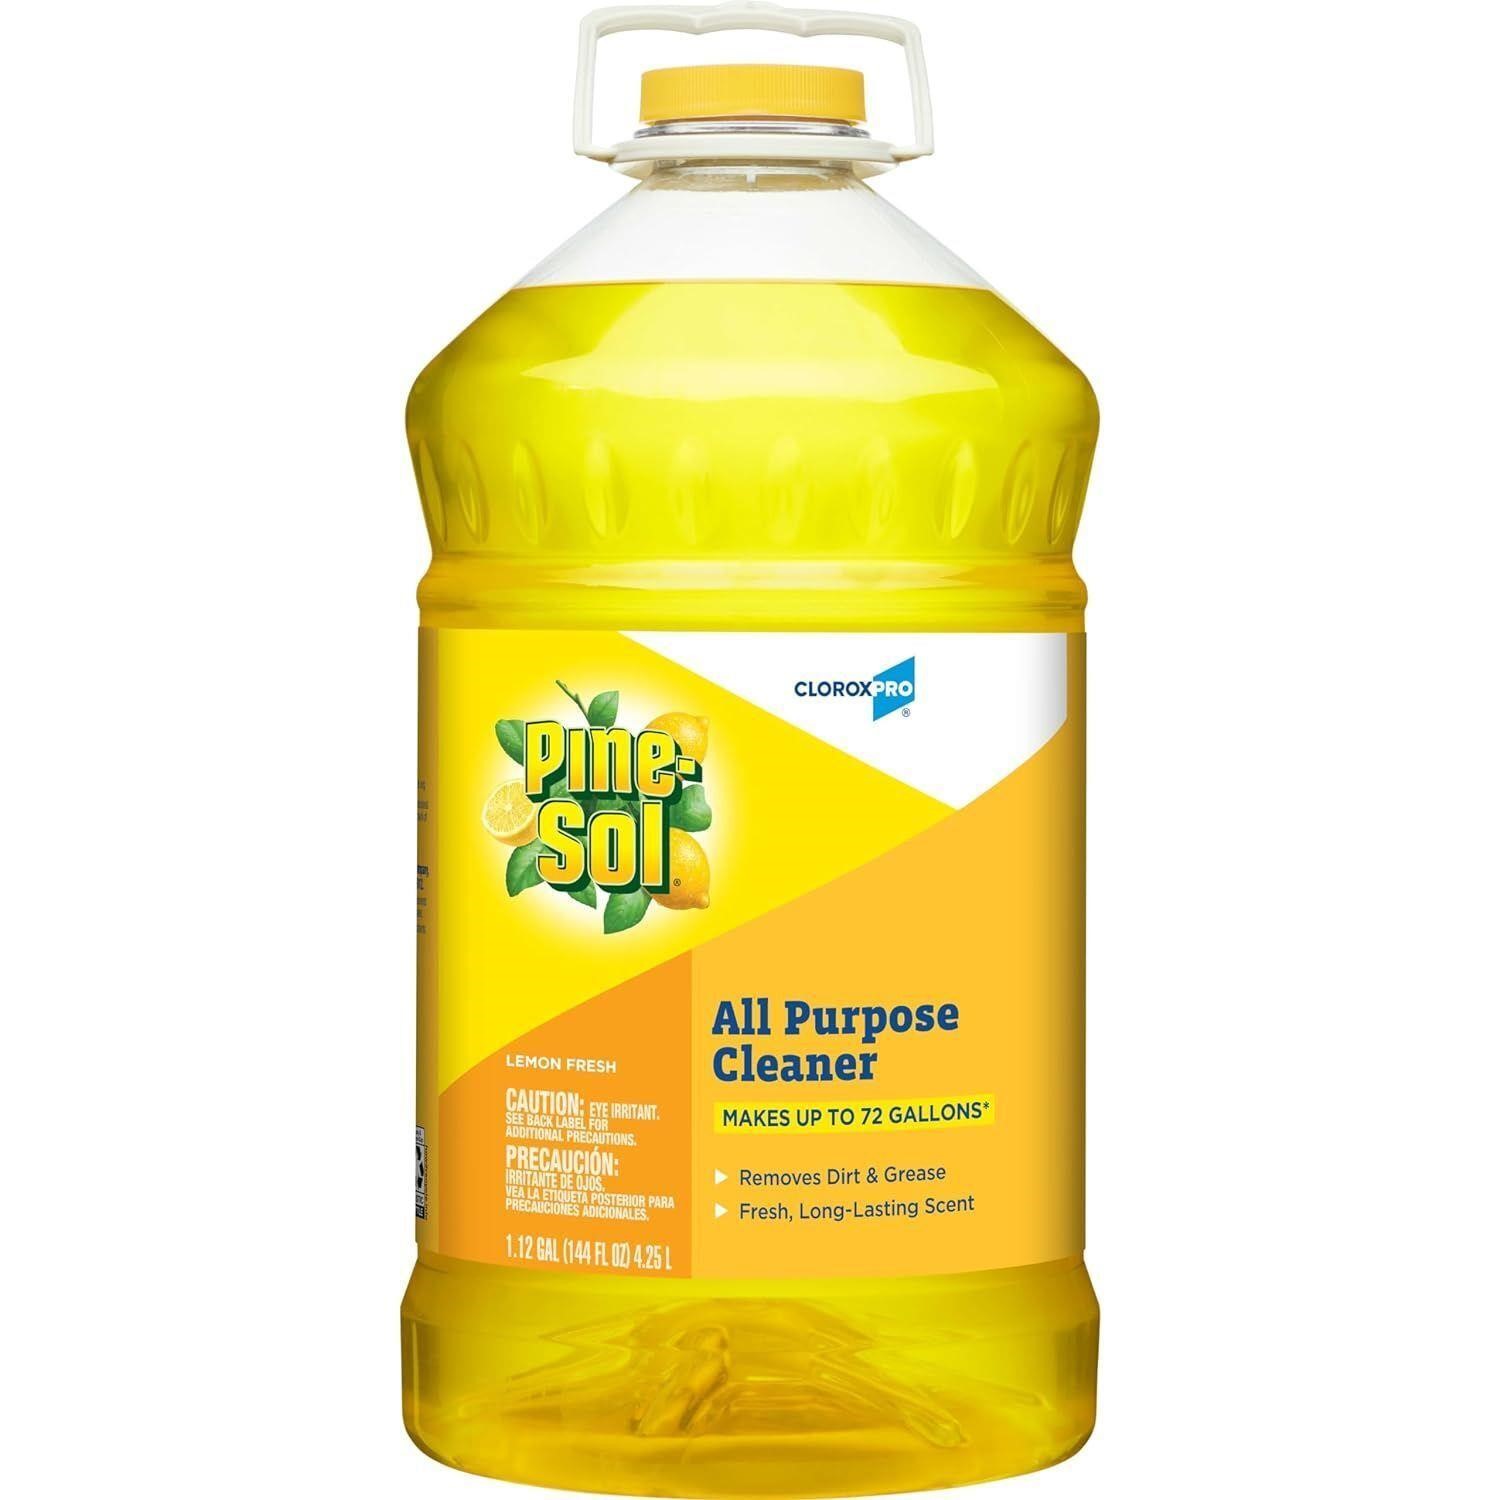 CloroxPro Pine-Sol All Purpose Cleaner